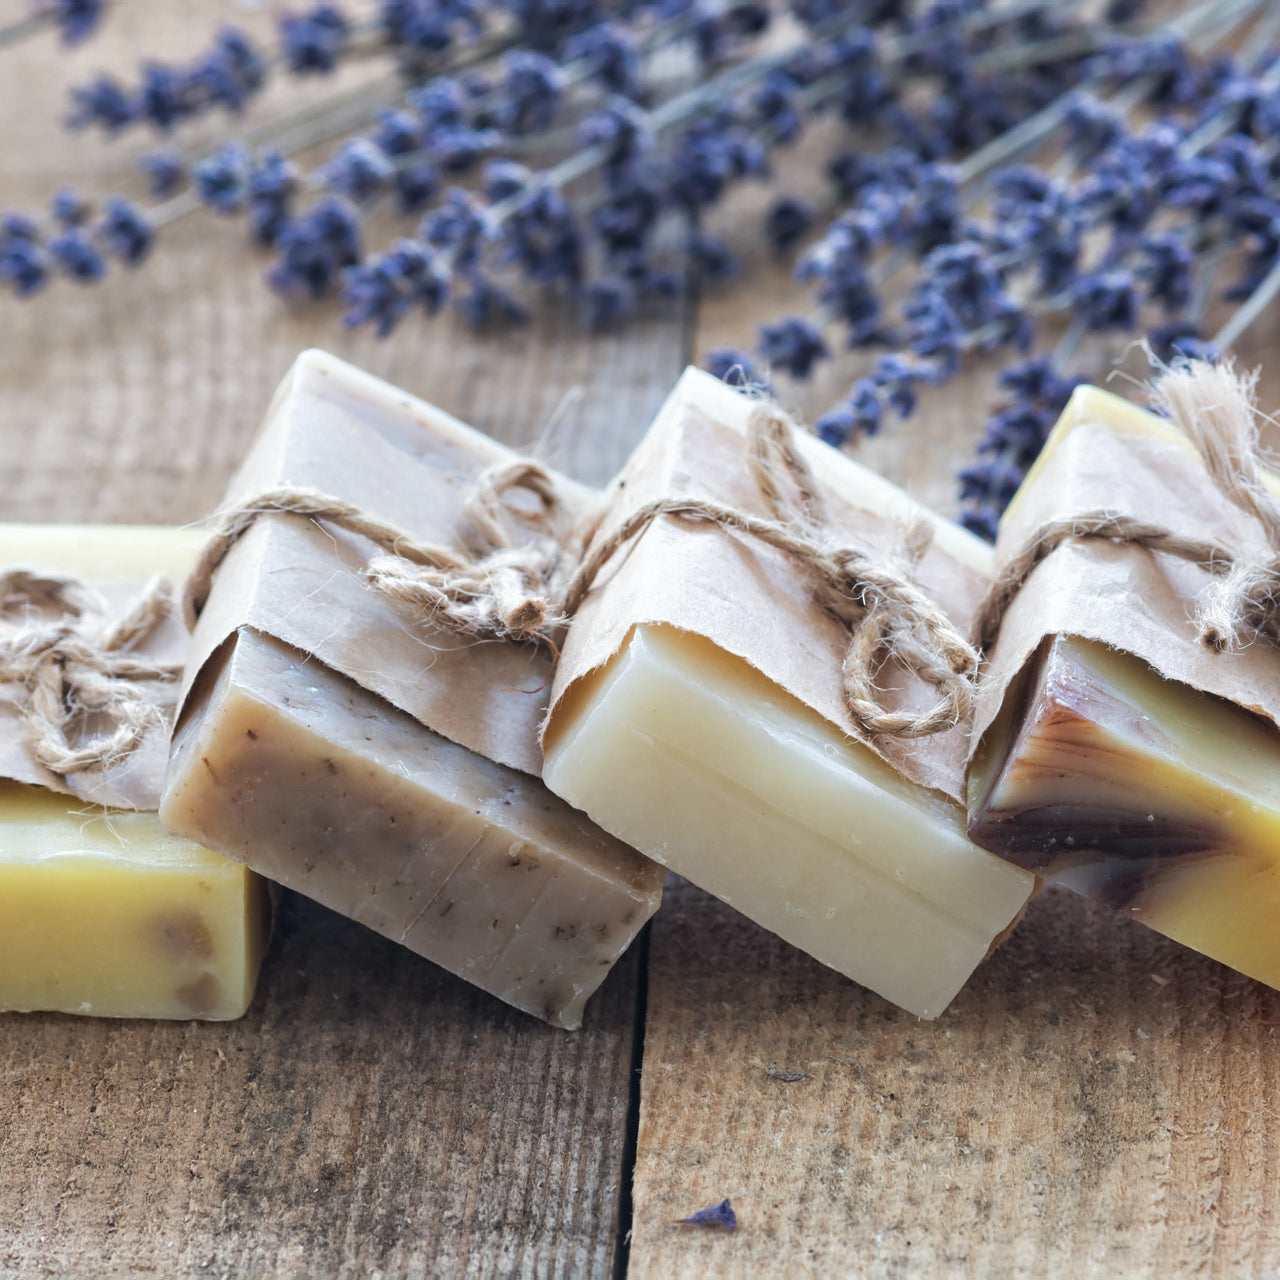 10 Reasons Why You Should Start Using Natural Olive Oil Soap